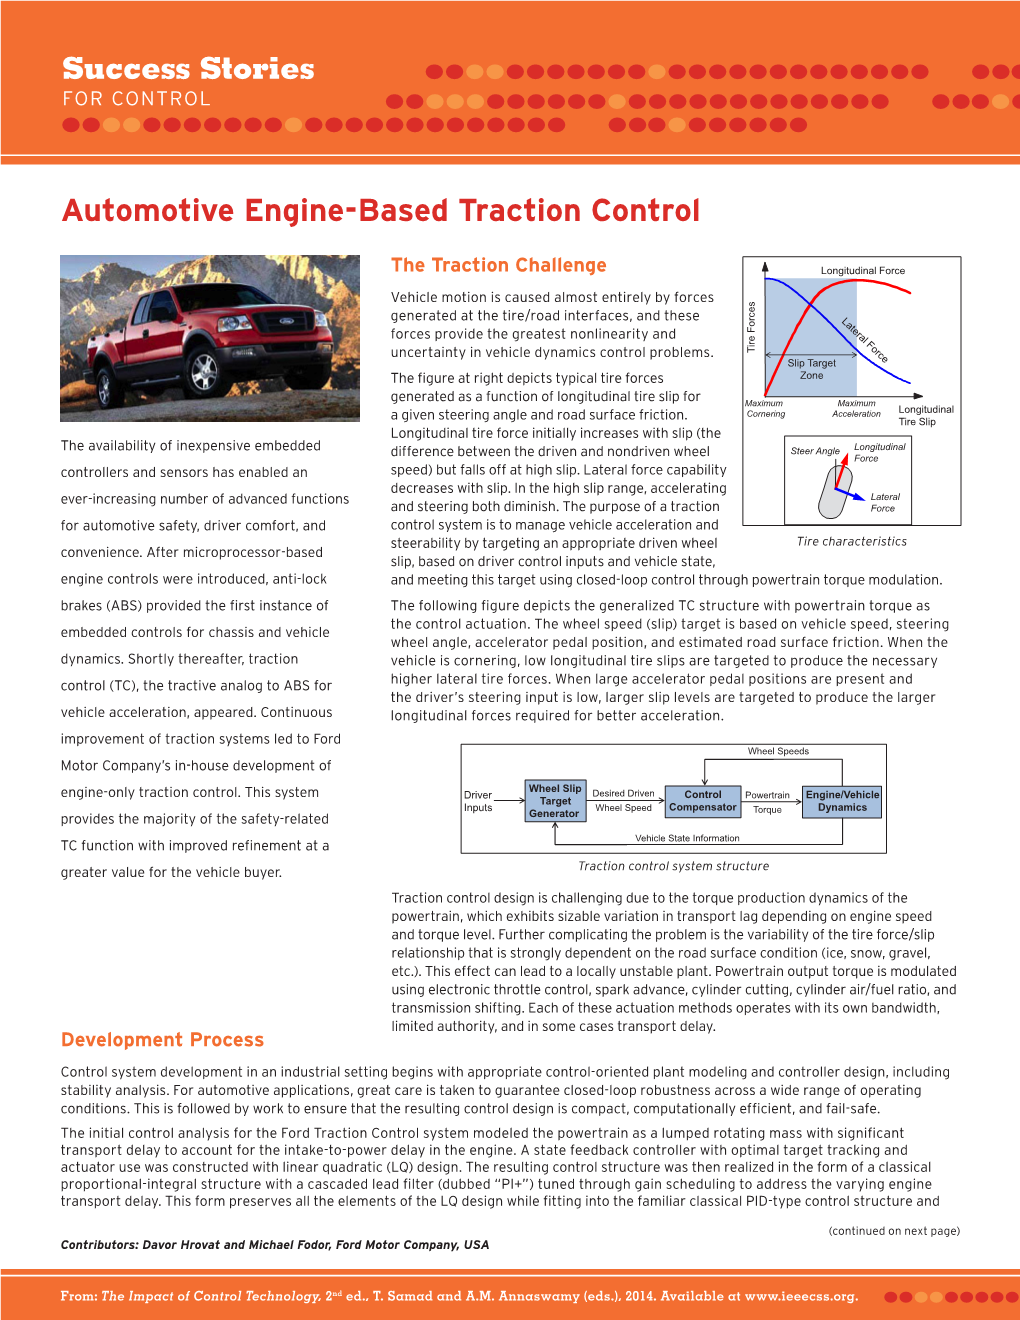 Automotive Engine-Based Traction Control